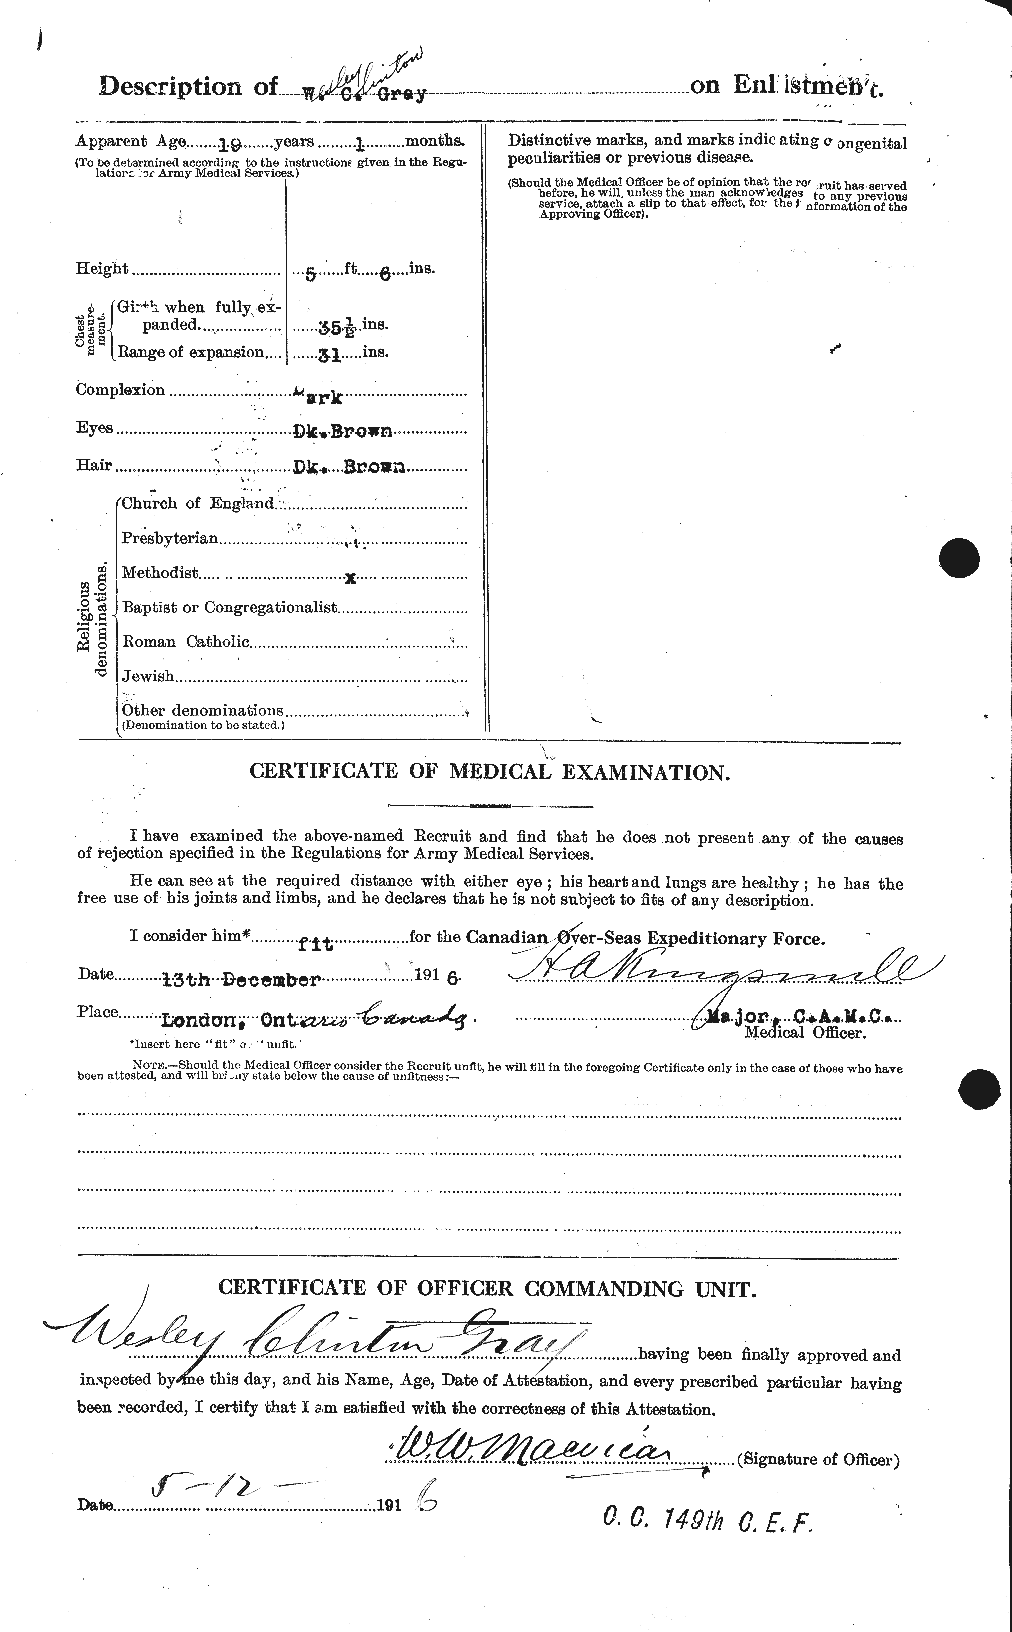 Personnel Records of the First World War - CEF 361756b